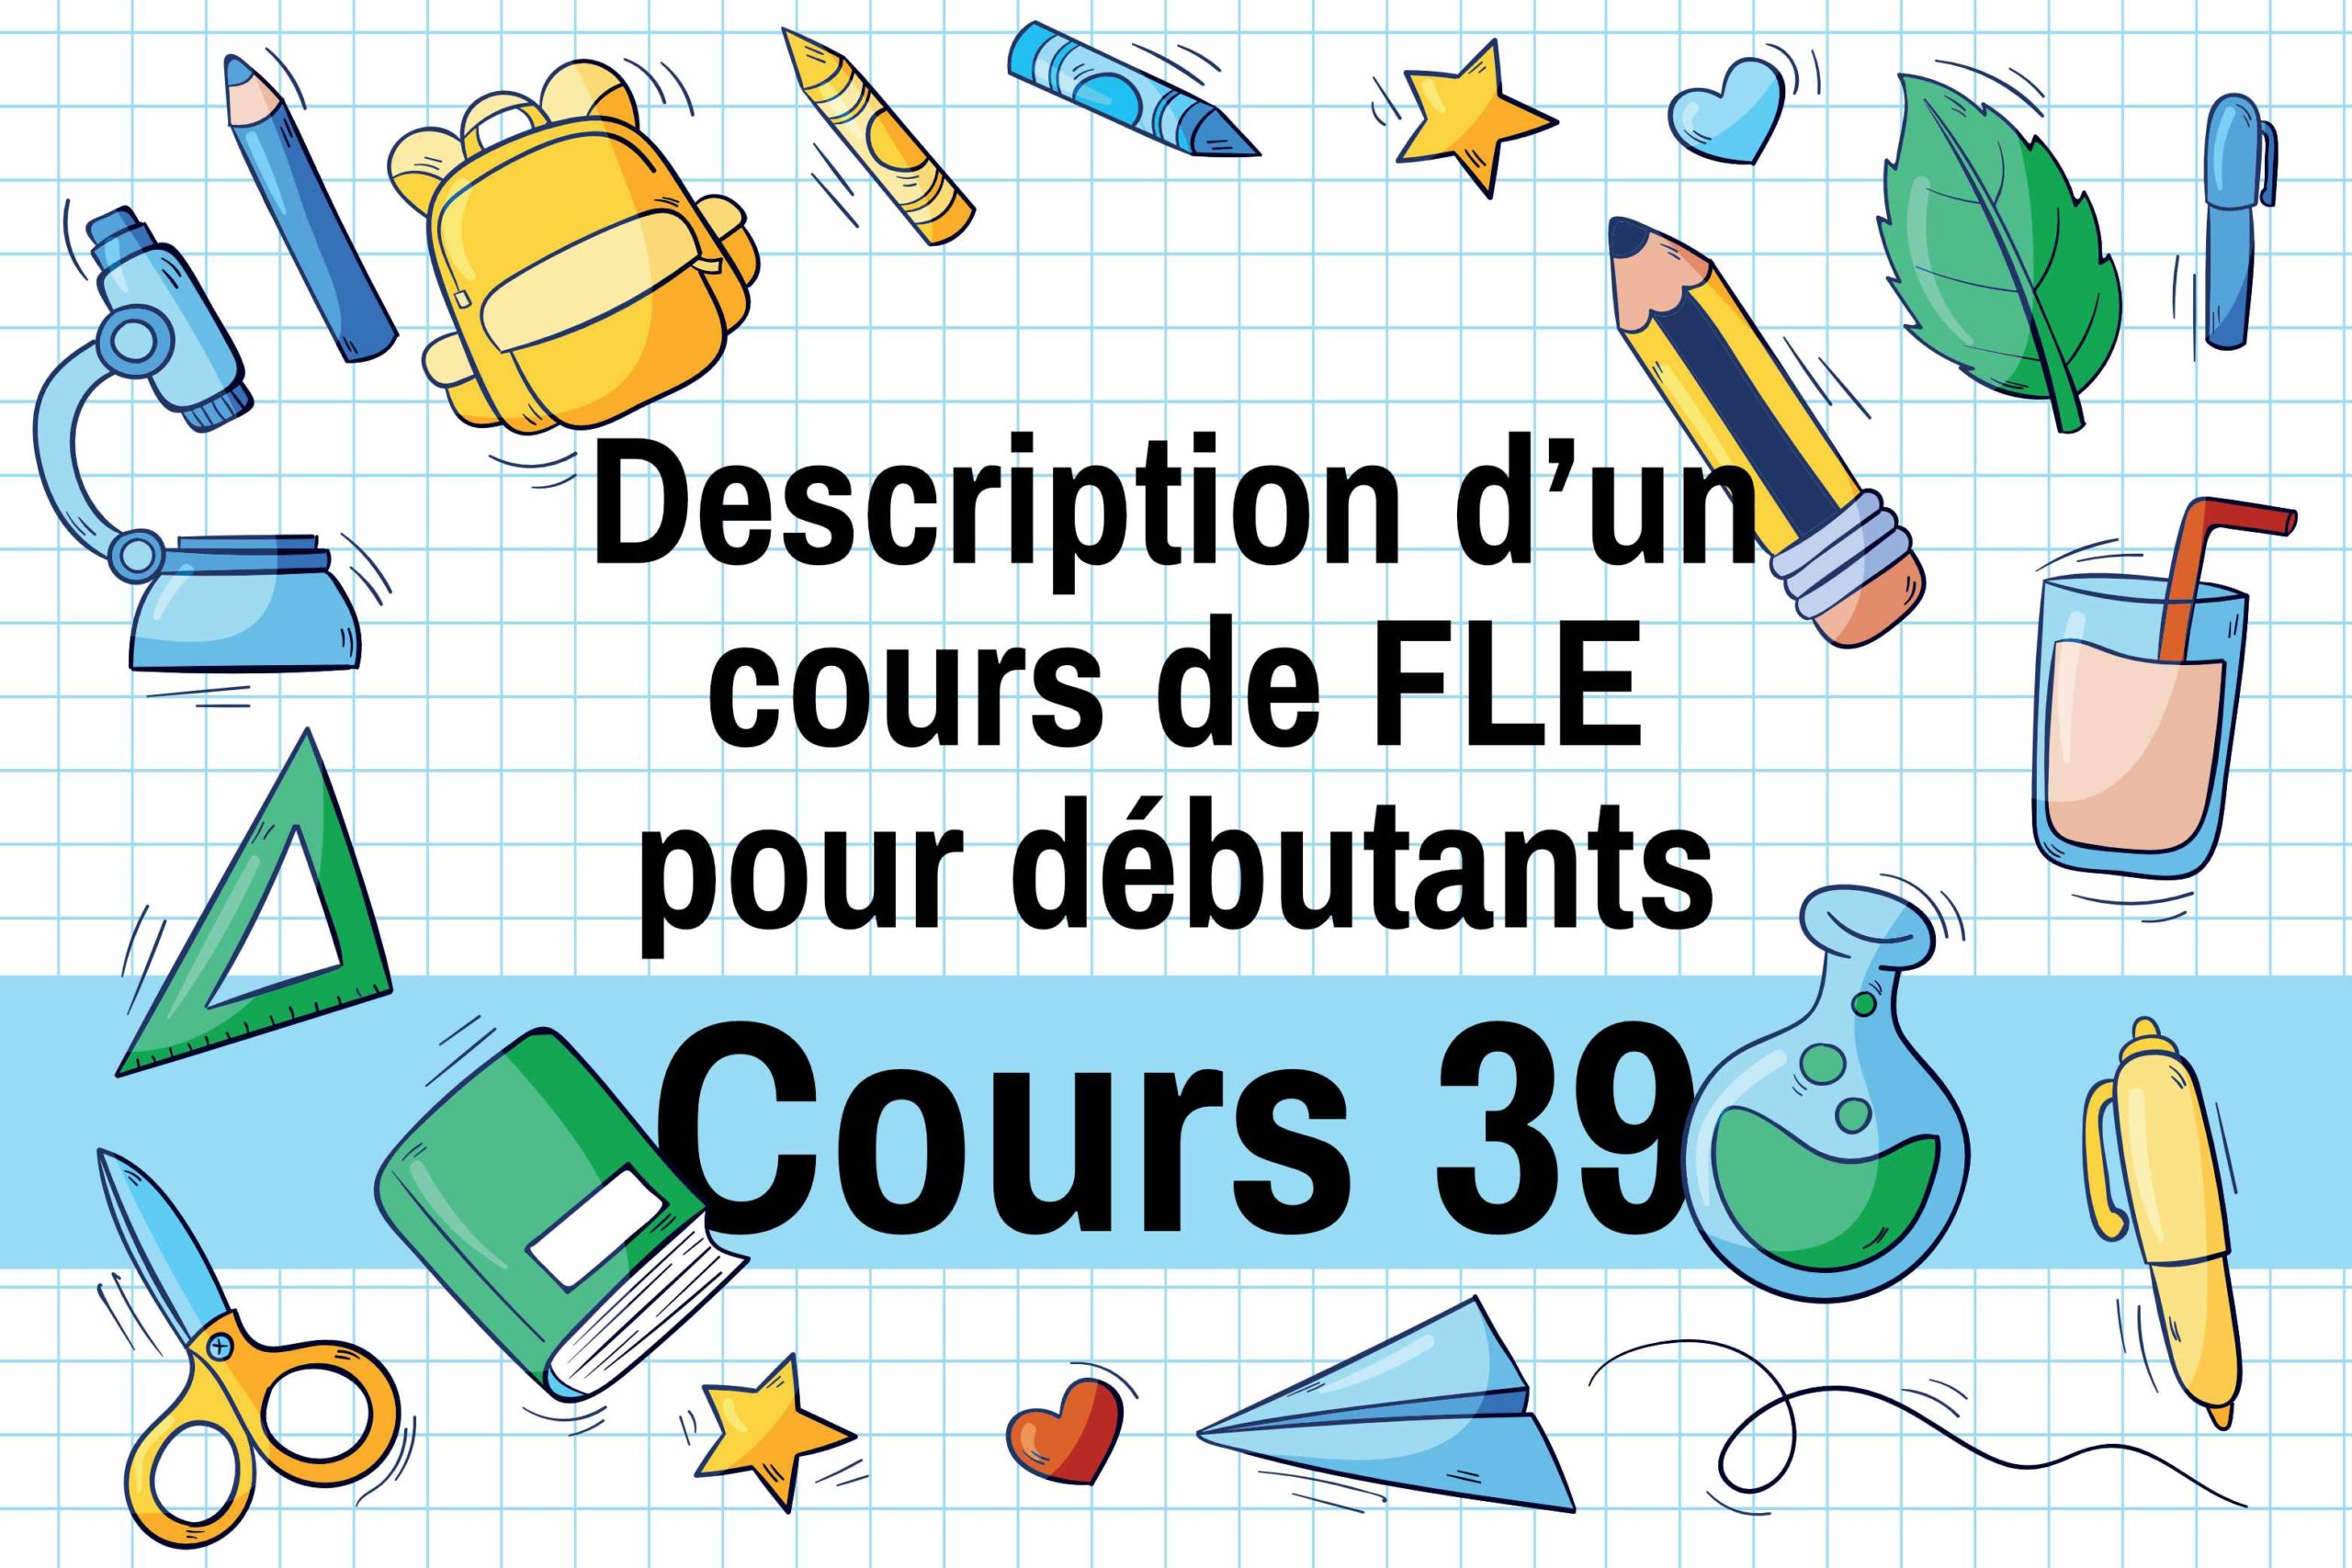 Cours 39